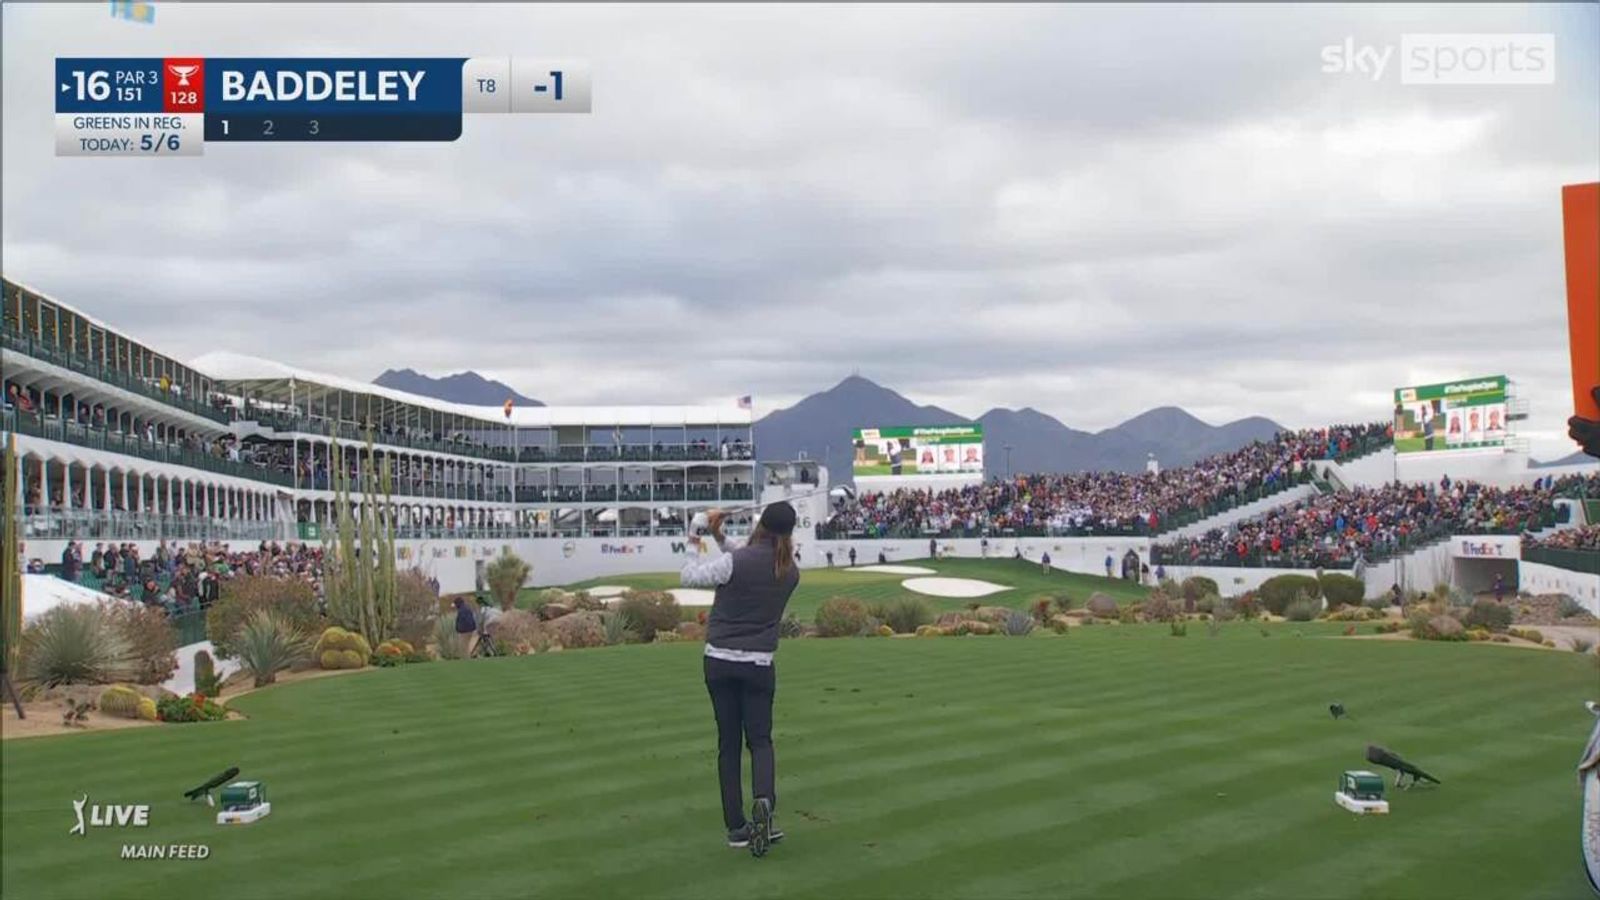 Aaron Baddeley almost makes ace at iconic 16th | Golf News | Sky Sports